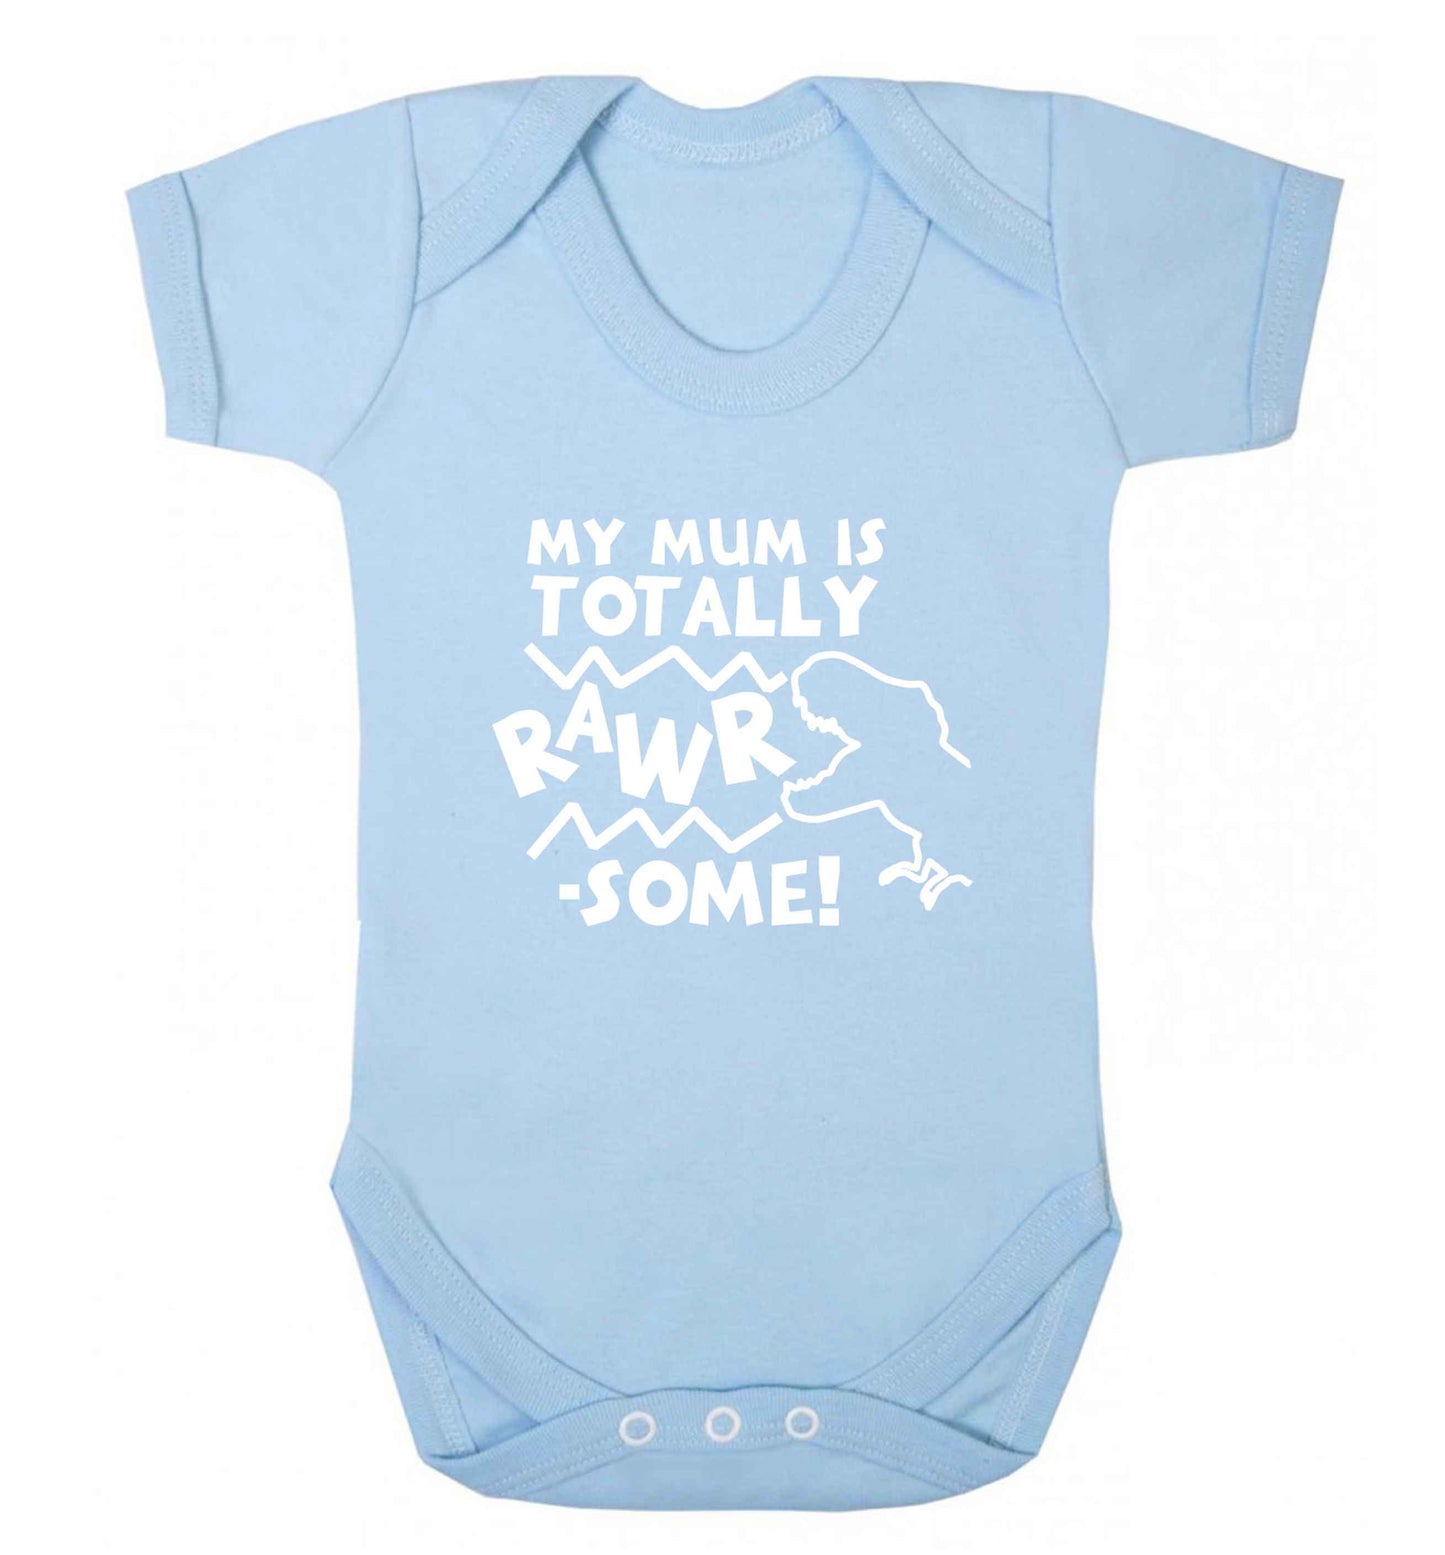 My mum is totally rawrsome baby vest pale blue 18-24 months